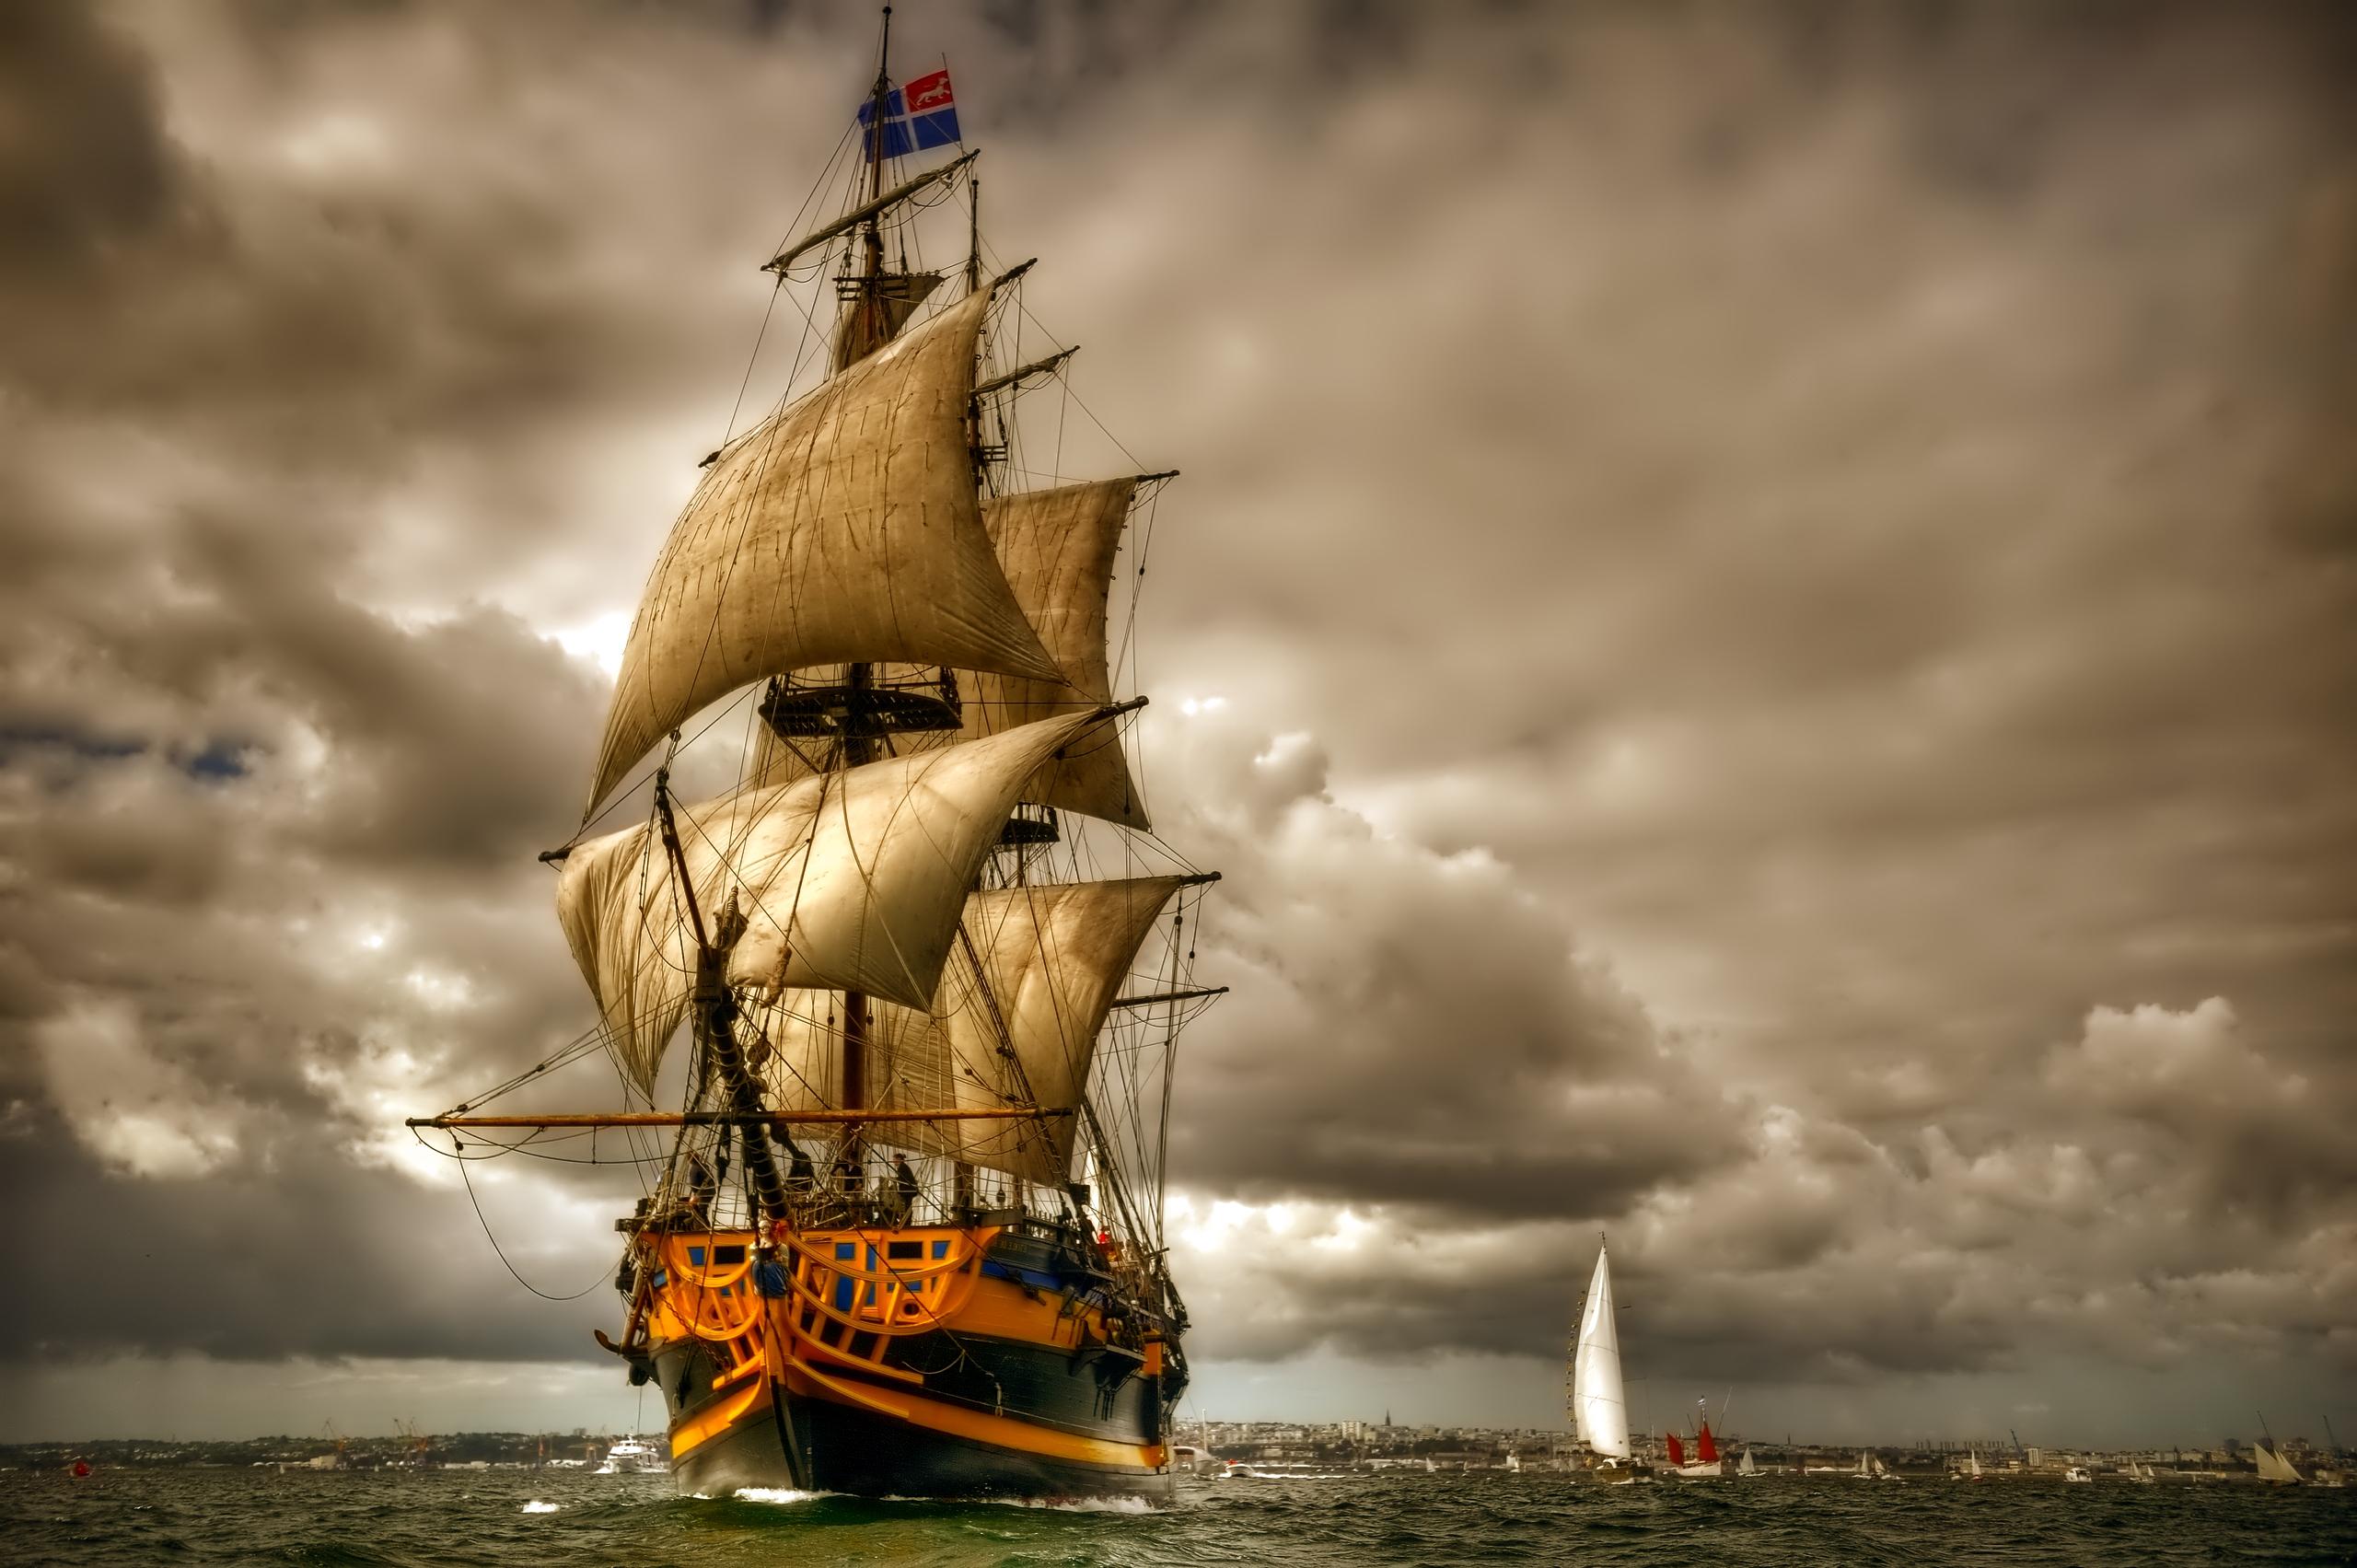 28+ HD Sailing Ship Wallpapers, Backgrounds, Images | Design Trends